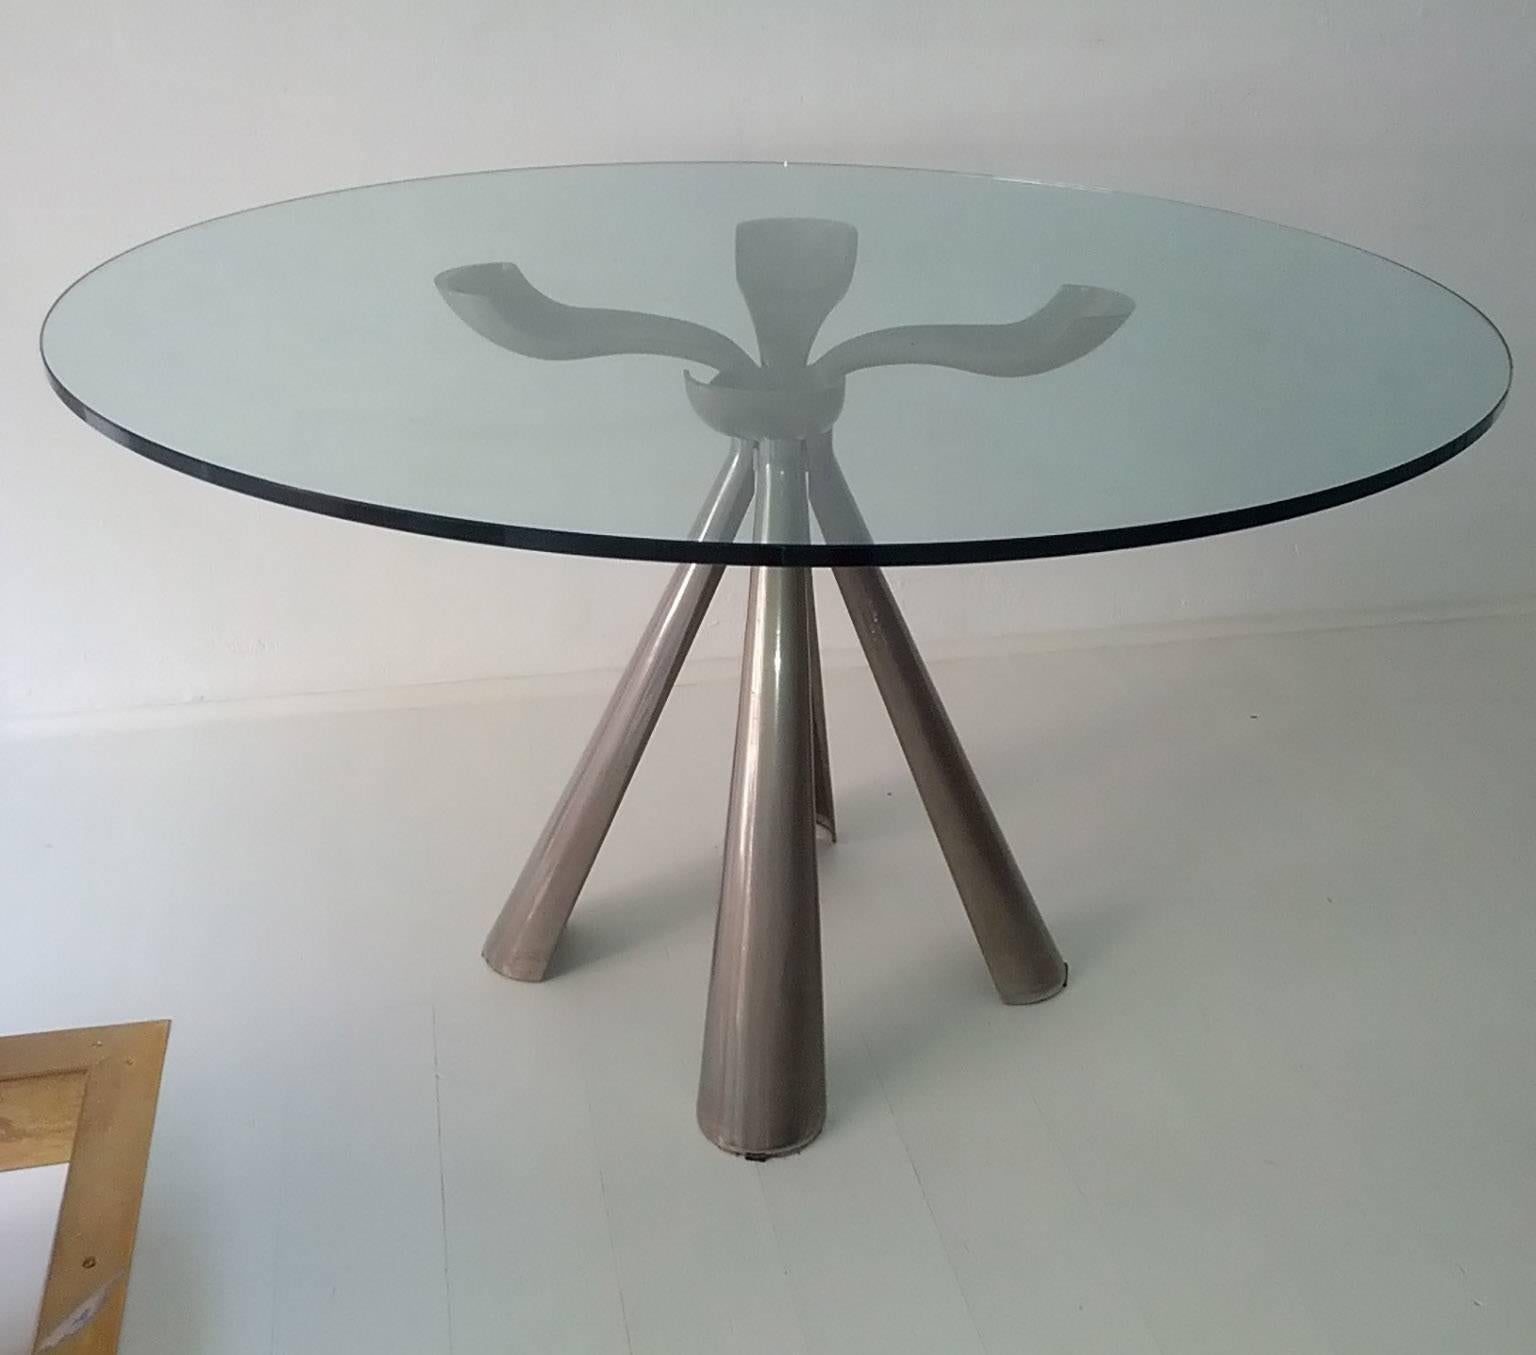 Elegant centre table designed by Vittorio Introini for Saporiti in Albizzate, 1972.
This example is signed and numbered on one leg.
Made of cast aluminium base and round glass top.
Published.